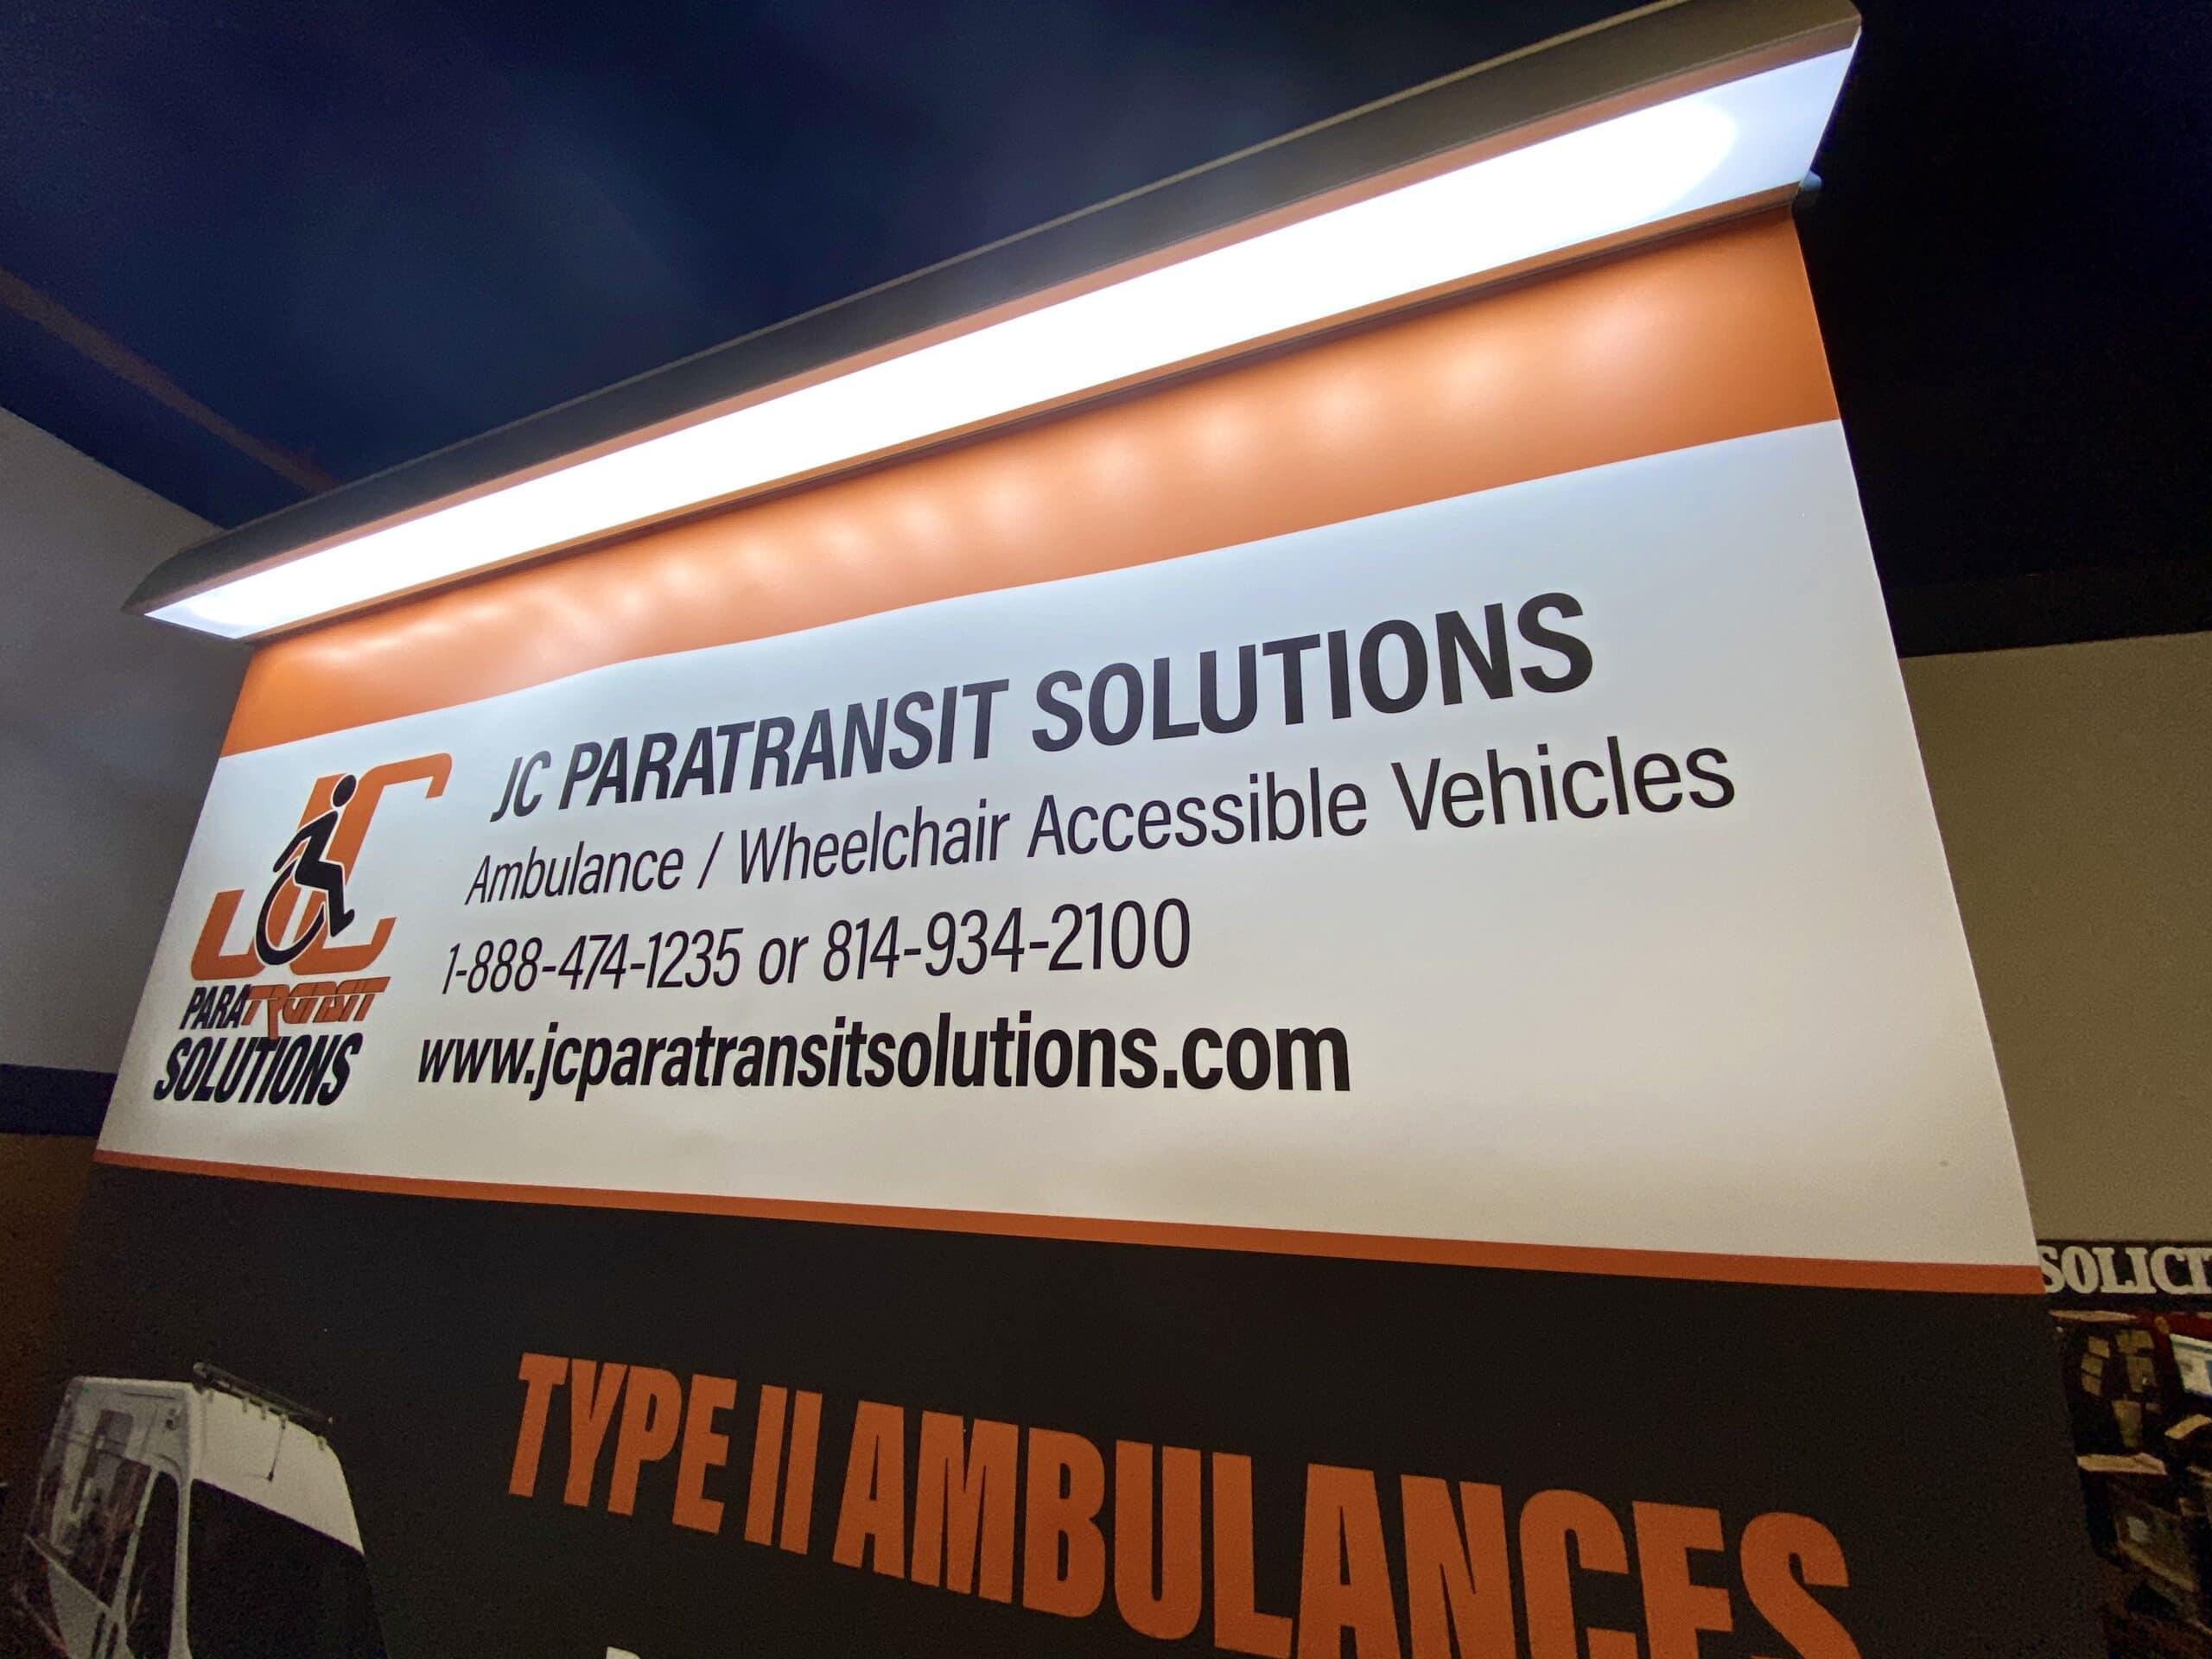 LED Retractable Banner for JC Paratransit Solutions by 12-Point SignWorks